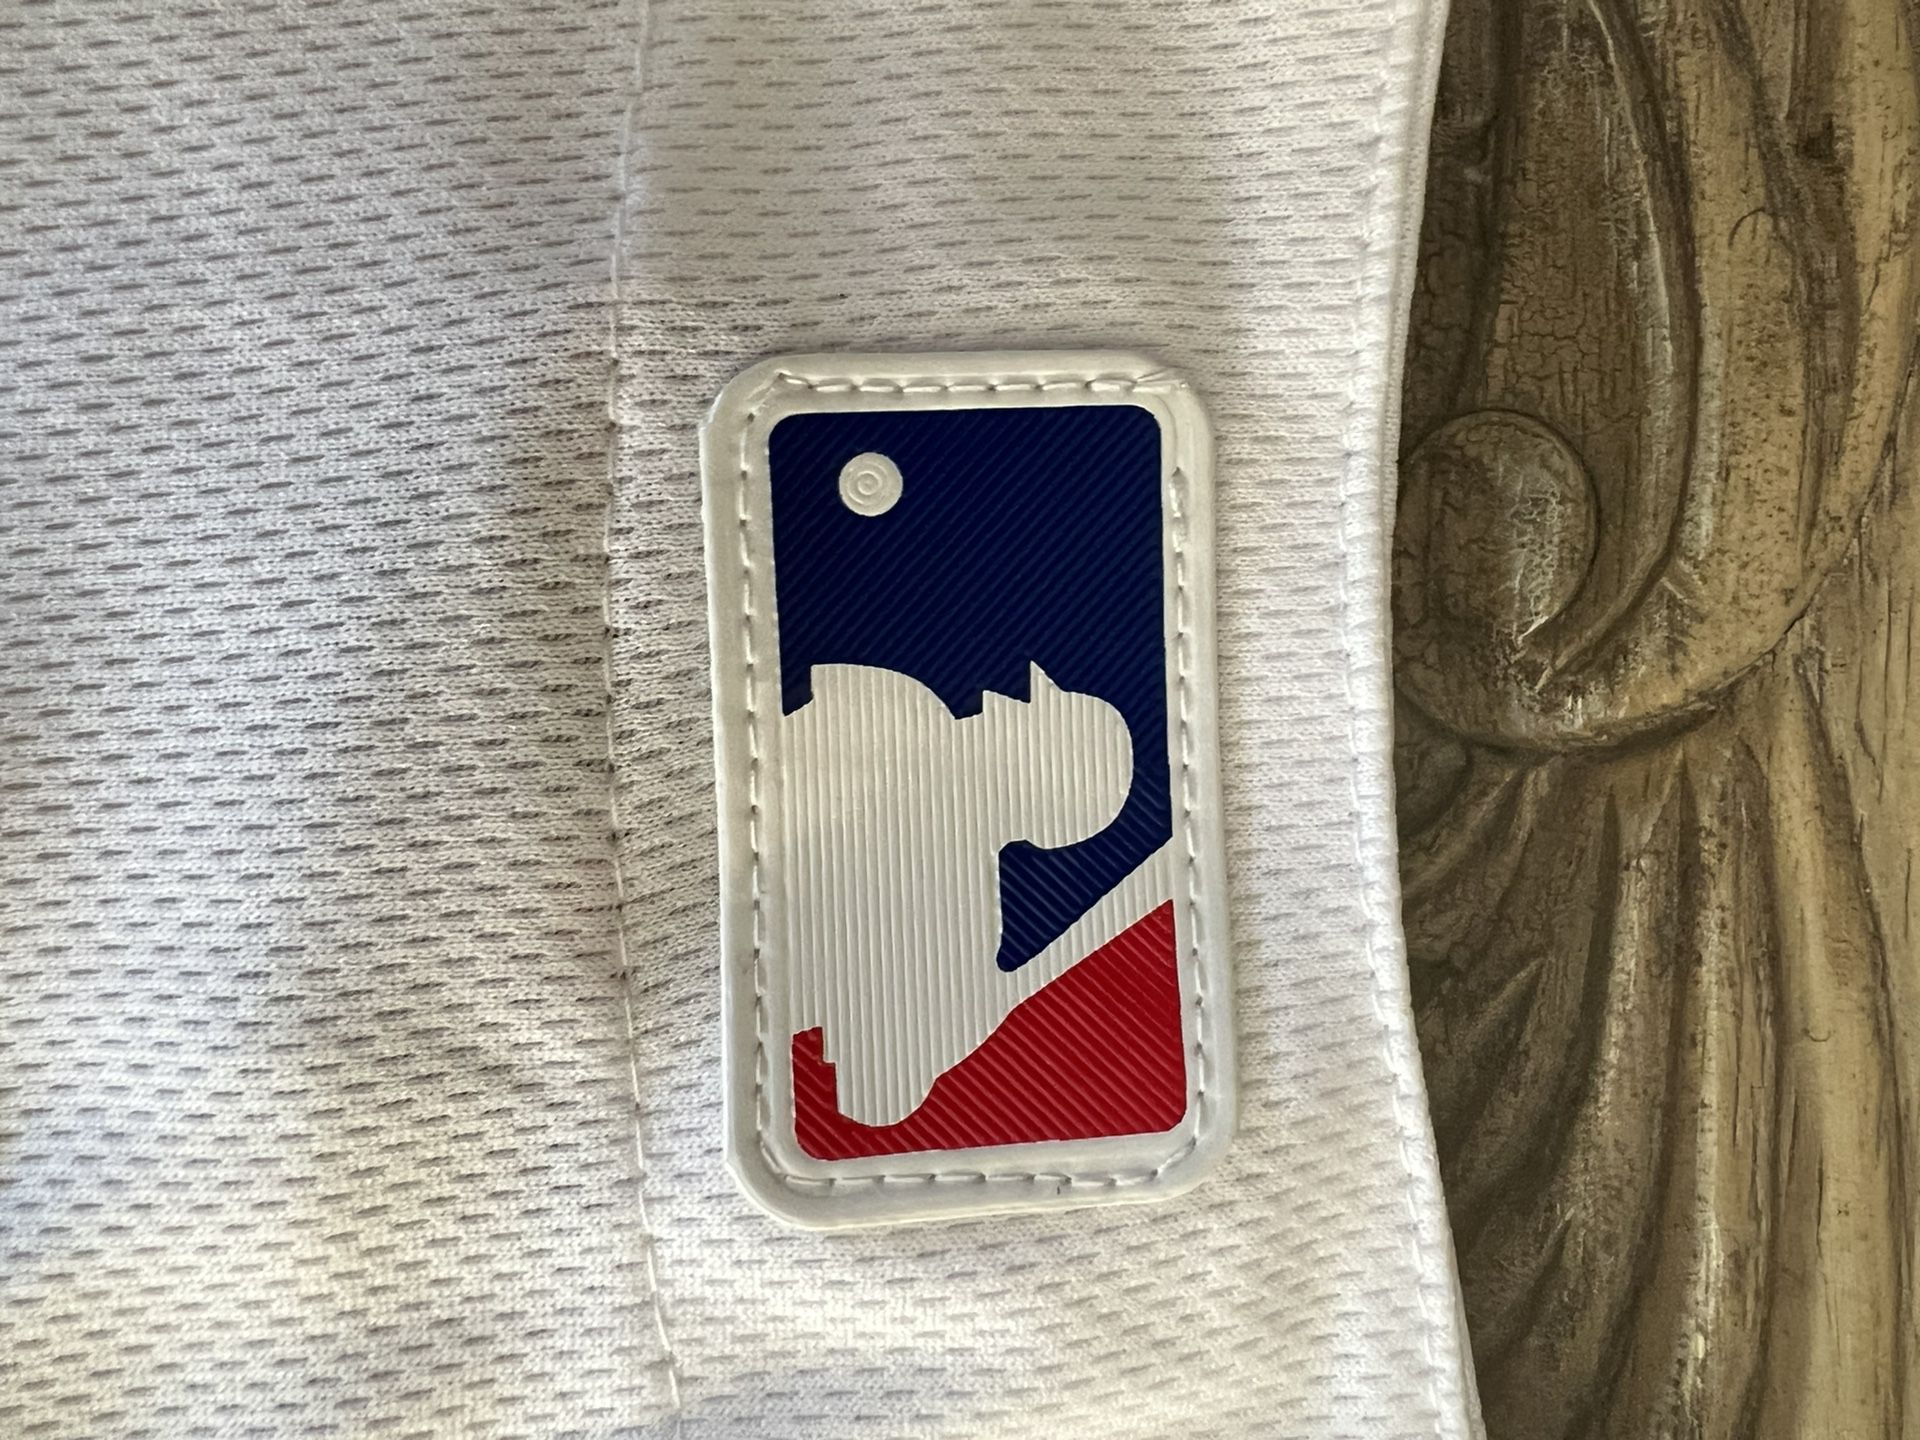 Los Angeles Dodgers Julio Urias #7 black stitched jersey for Sale in  Riverside, CA - OfferUp